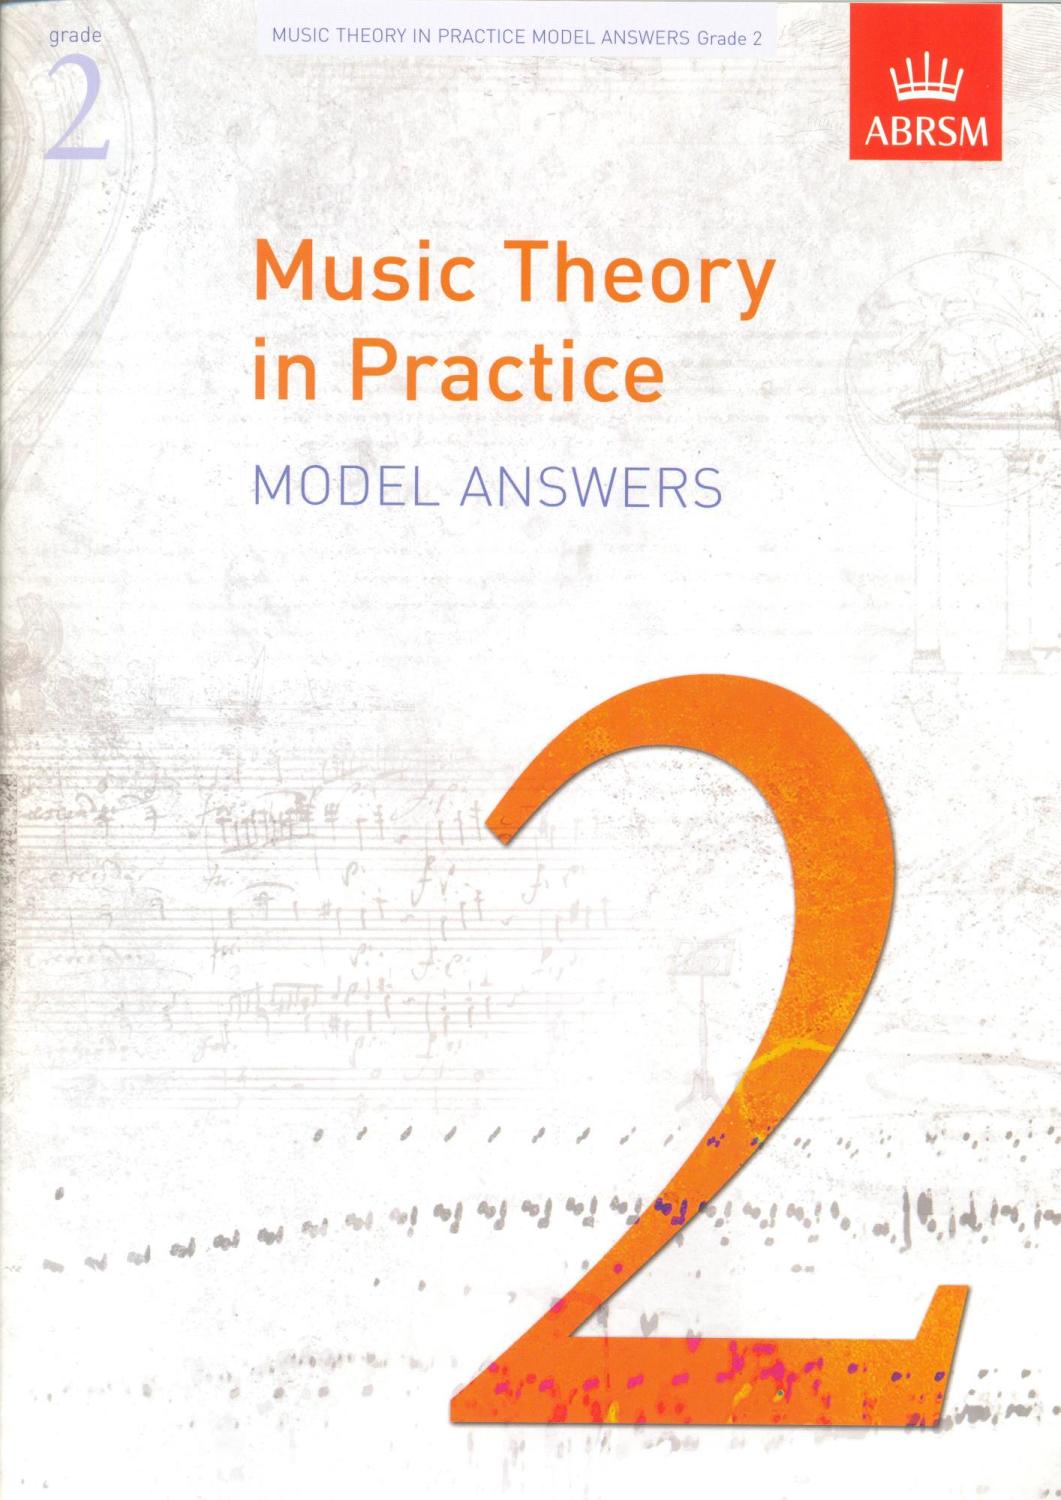 Music Theory in Practice ABRSM Model Answers Grade 2